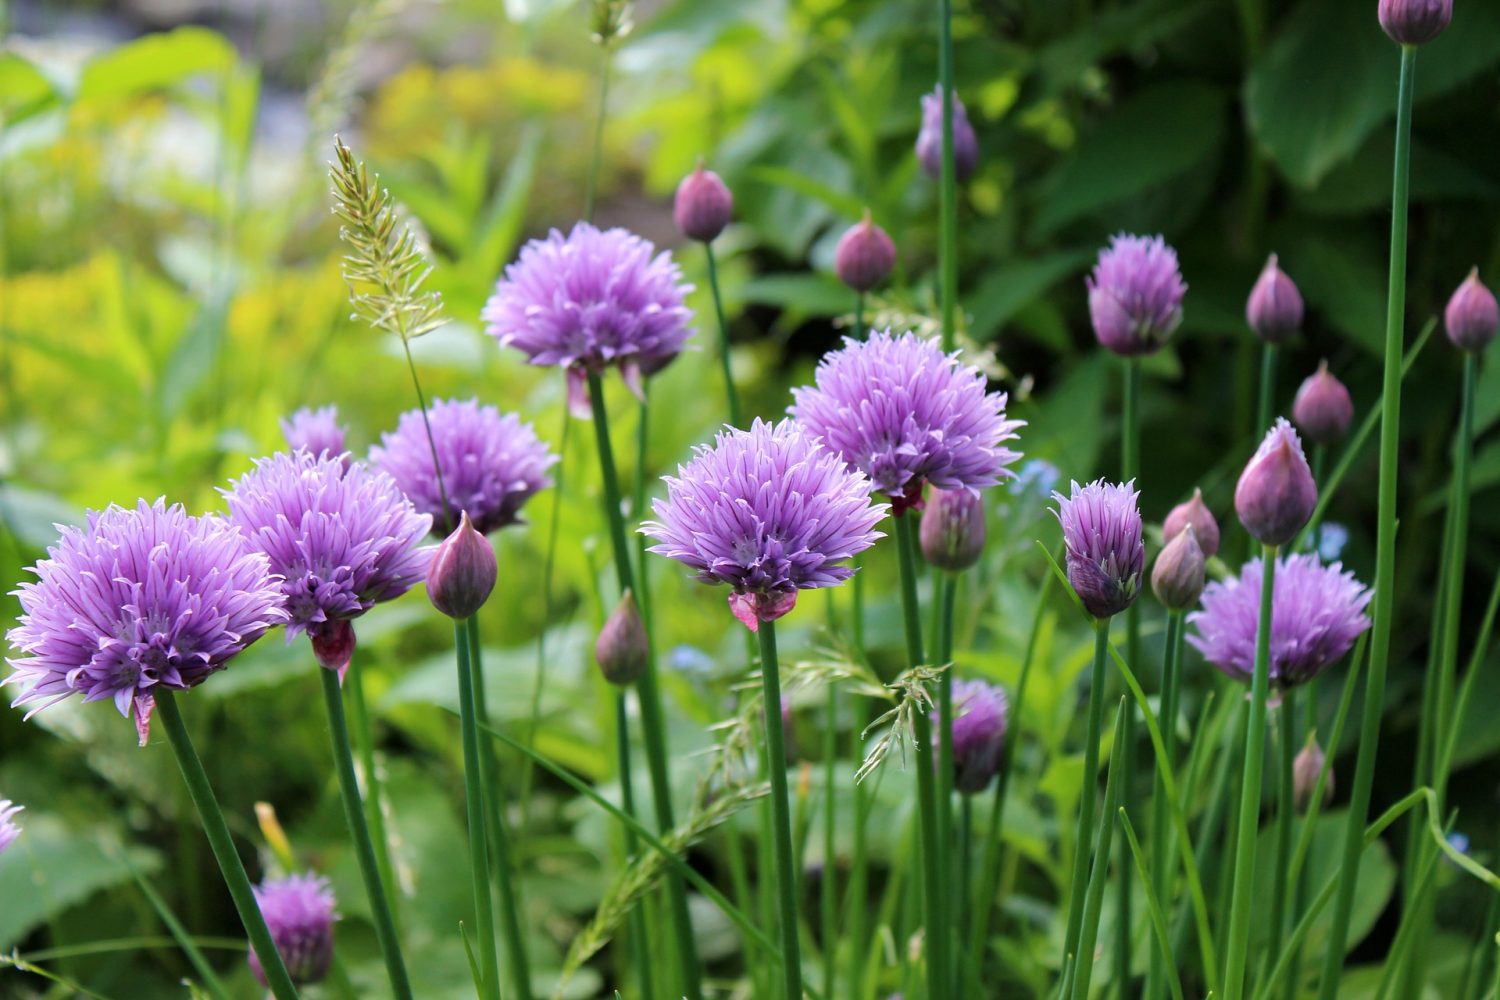 Health Benefits of Chives